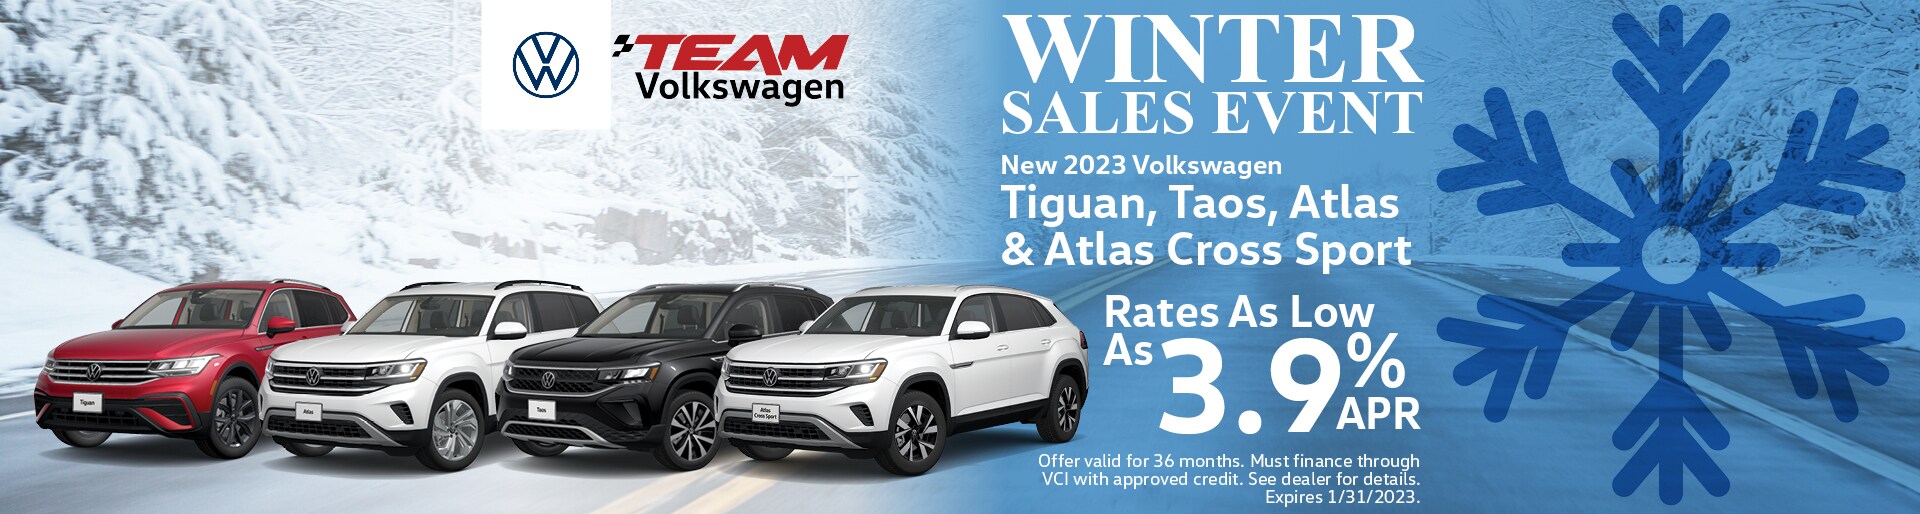 New 2023 Volkswagen Atlas, Atlas Cross Sport, Taos, and Tiguan with rates as low as 3.9% APR for 36 months.